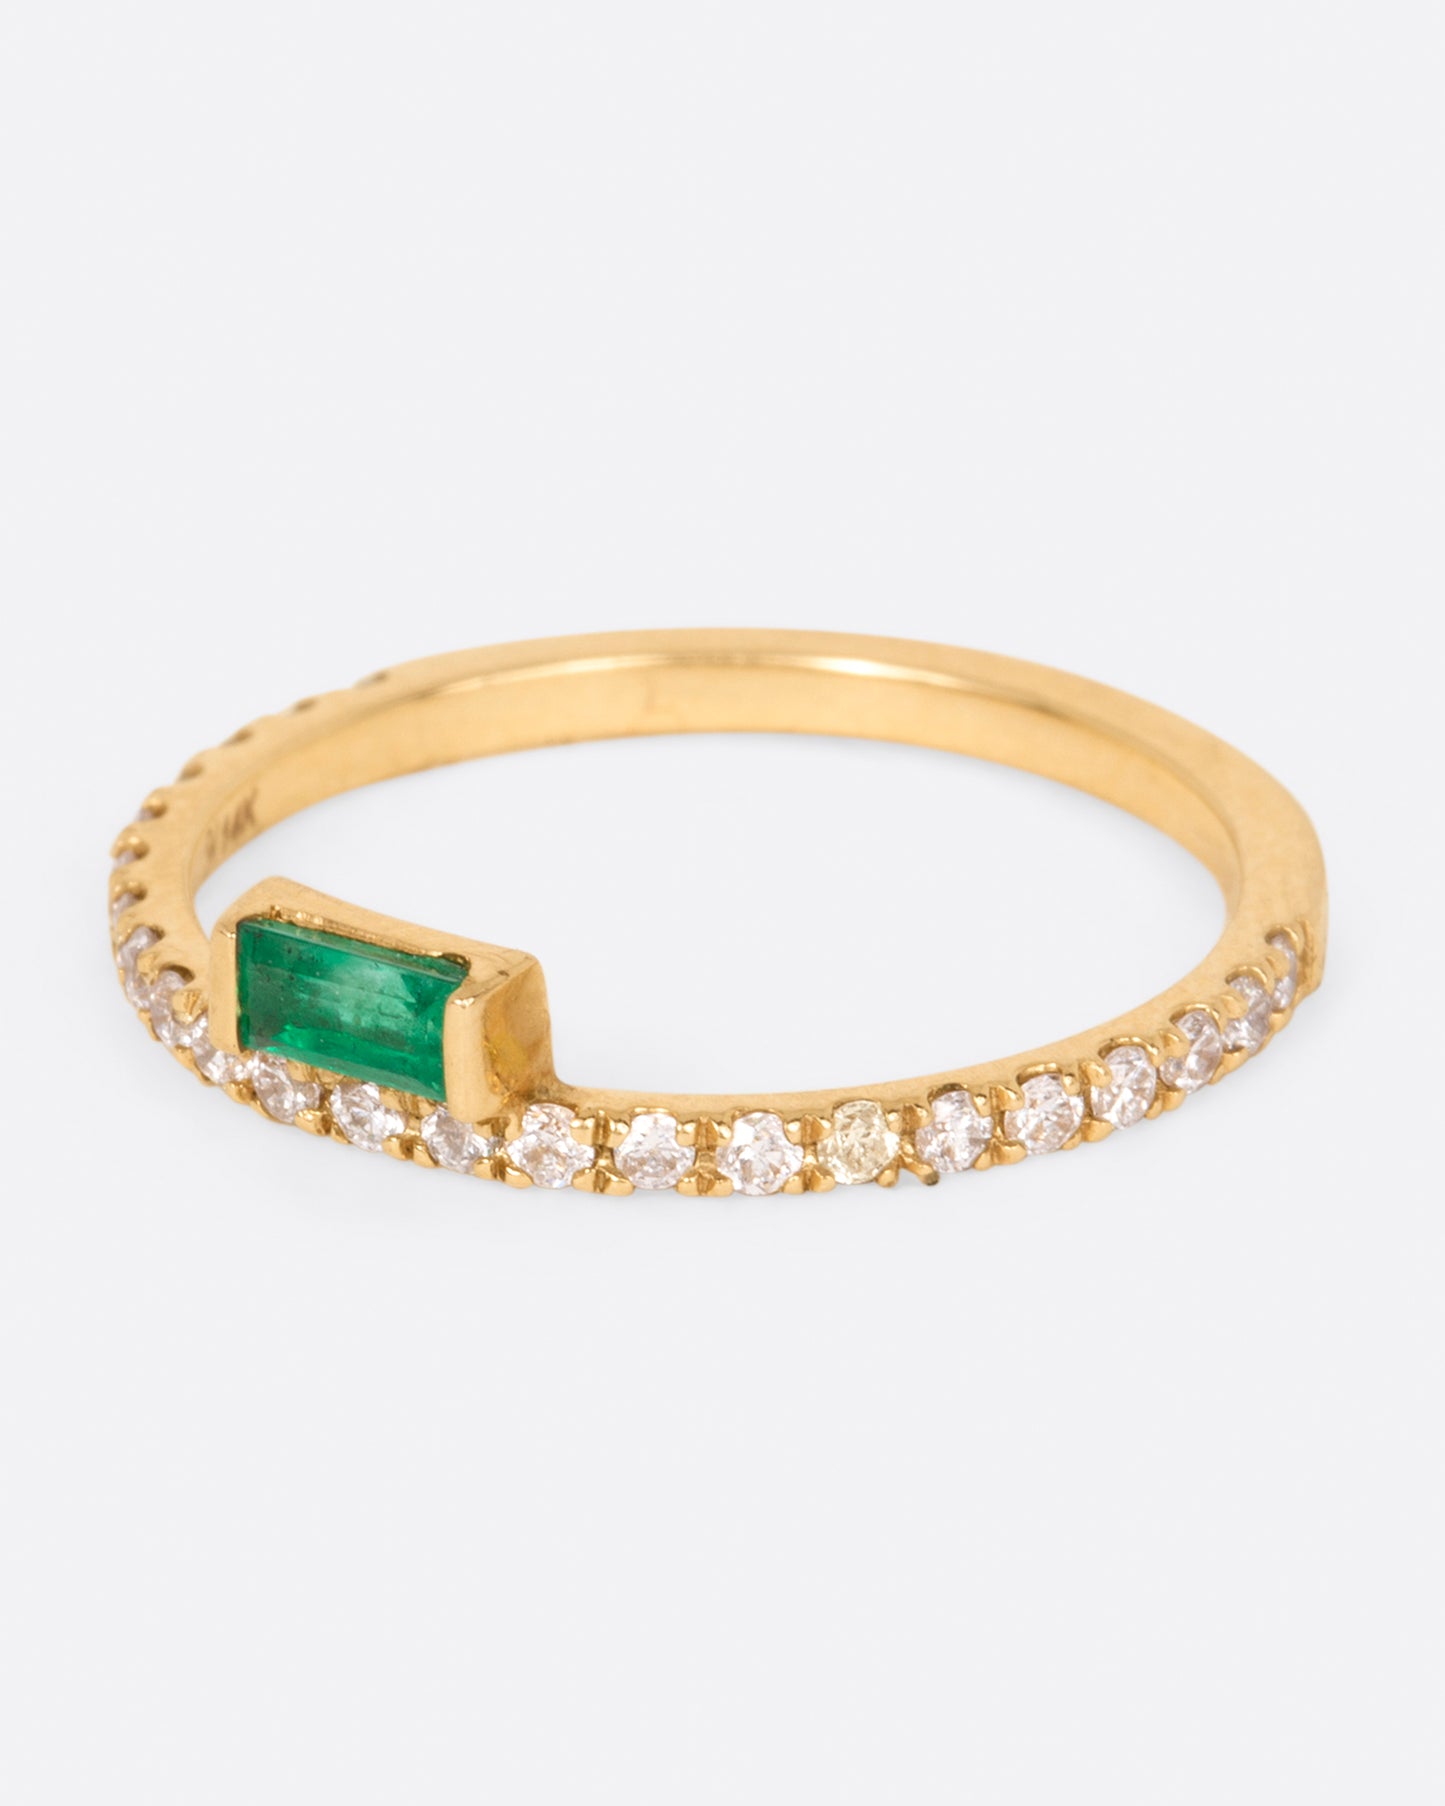 A yellow gold ring with white diamonds going 2/3 of the way around and an emerald baguette sitting atop it, shown from the side.